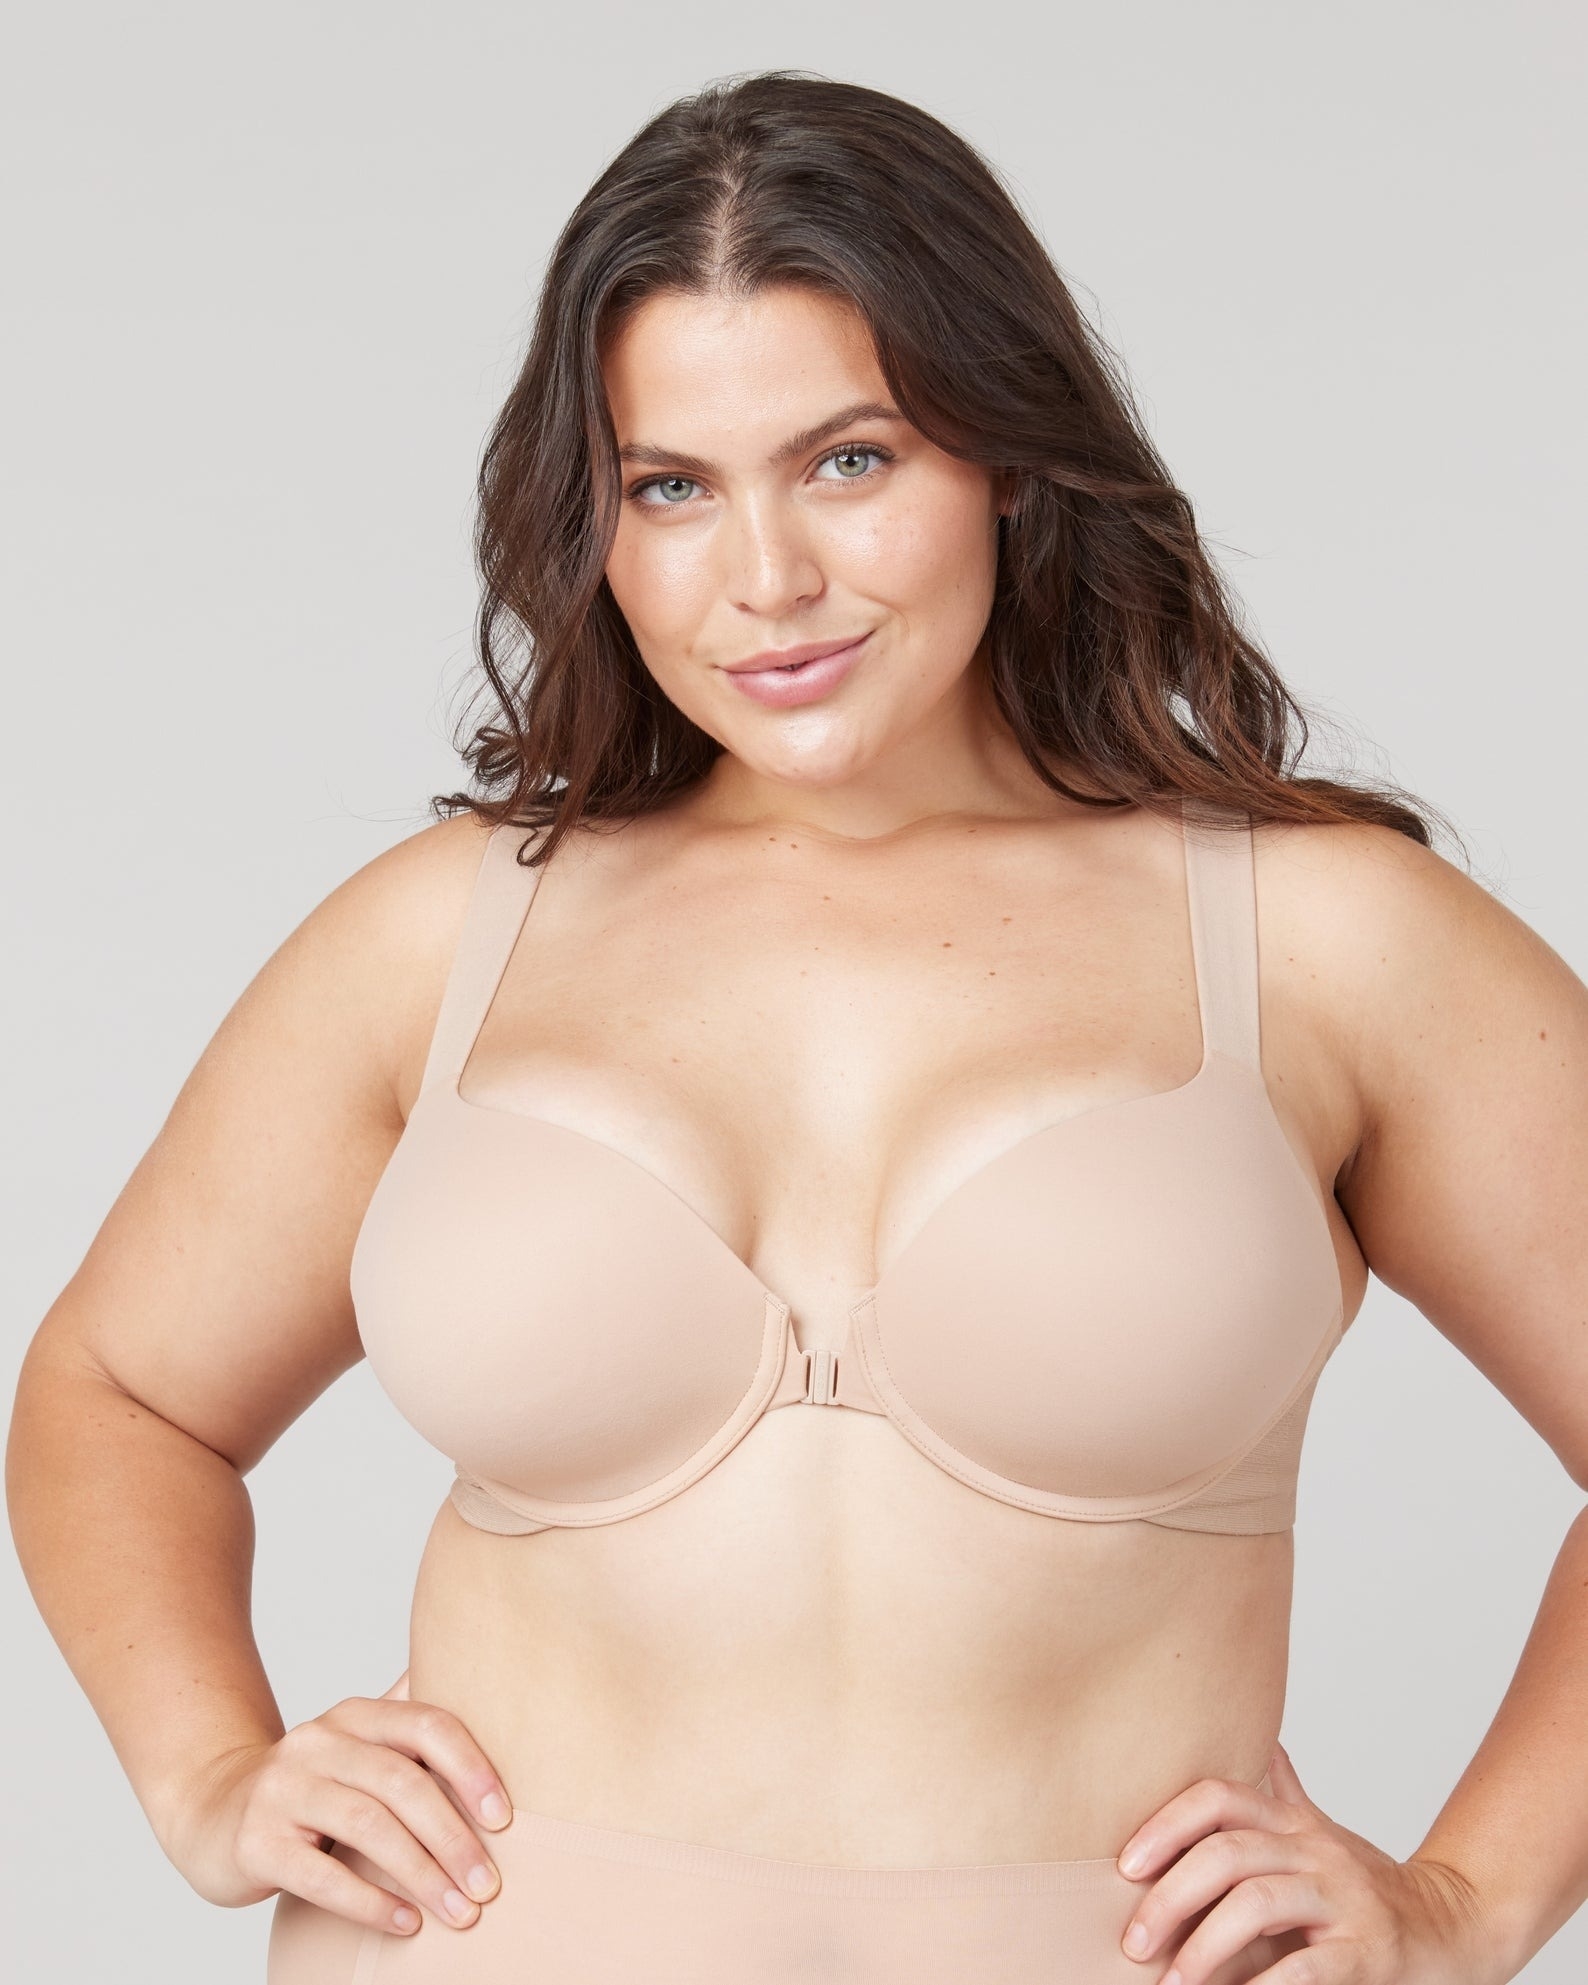 Where to Buy Bras Online: 18 Bra Stores You'll Love • budget